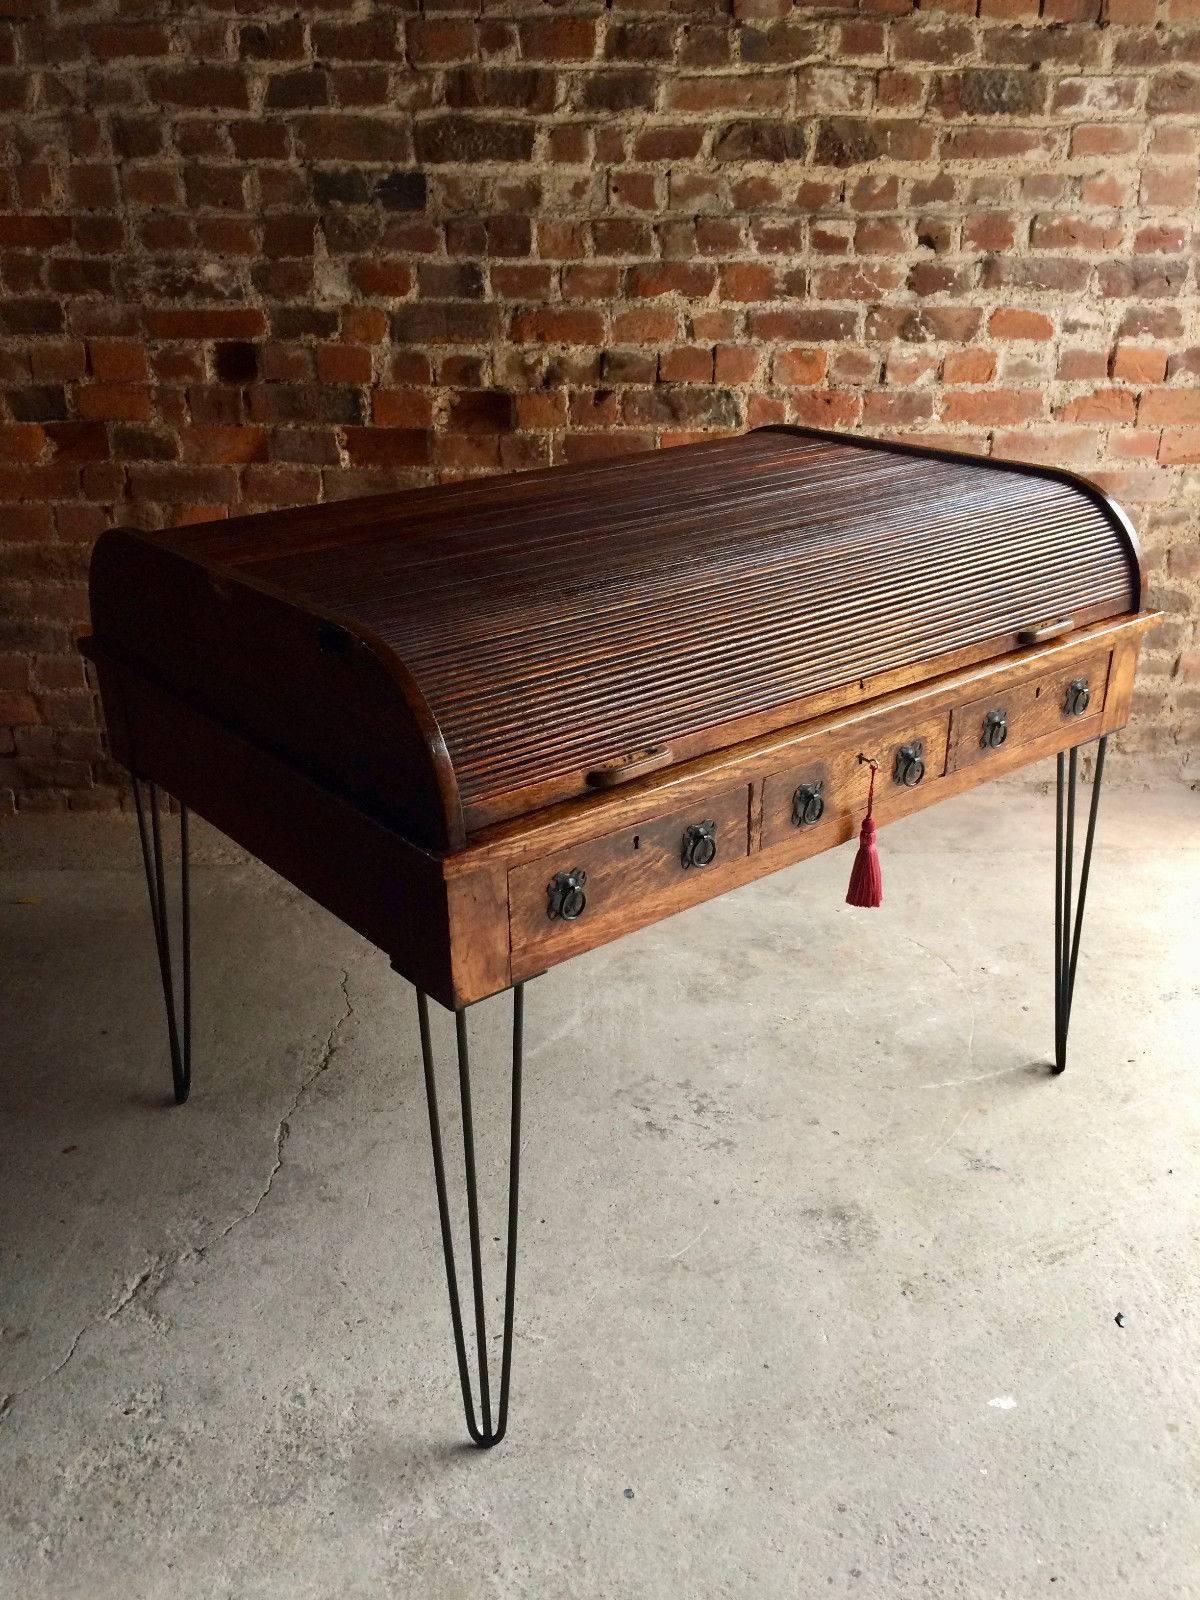 A magnificent antique Edwardian oak roll top desk circa 1903, with tambour slide, above fitted interior and red rexine writing surface, over three frieze drawers on recently added steel hairpin legs, comes with one non working key with tassel, looks